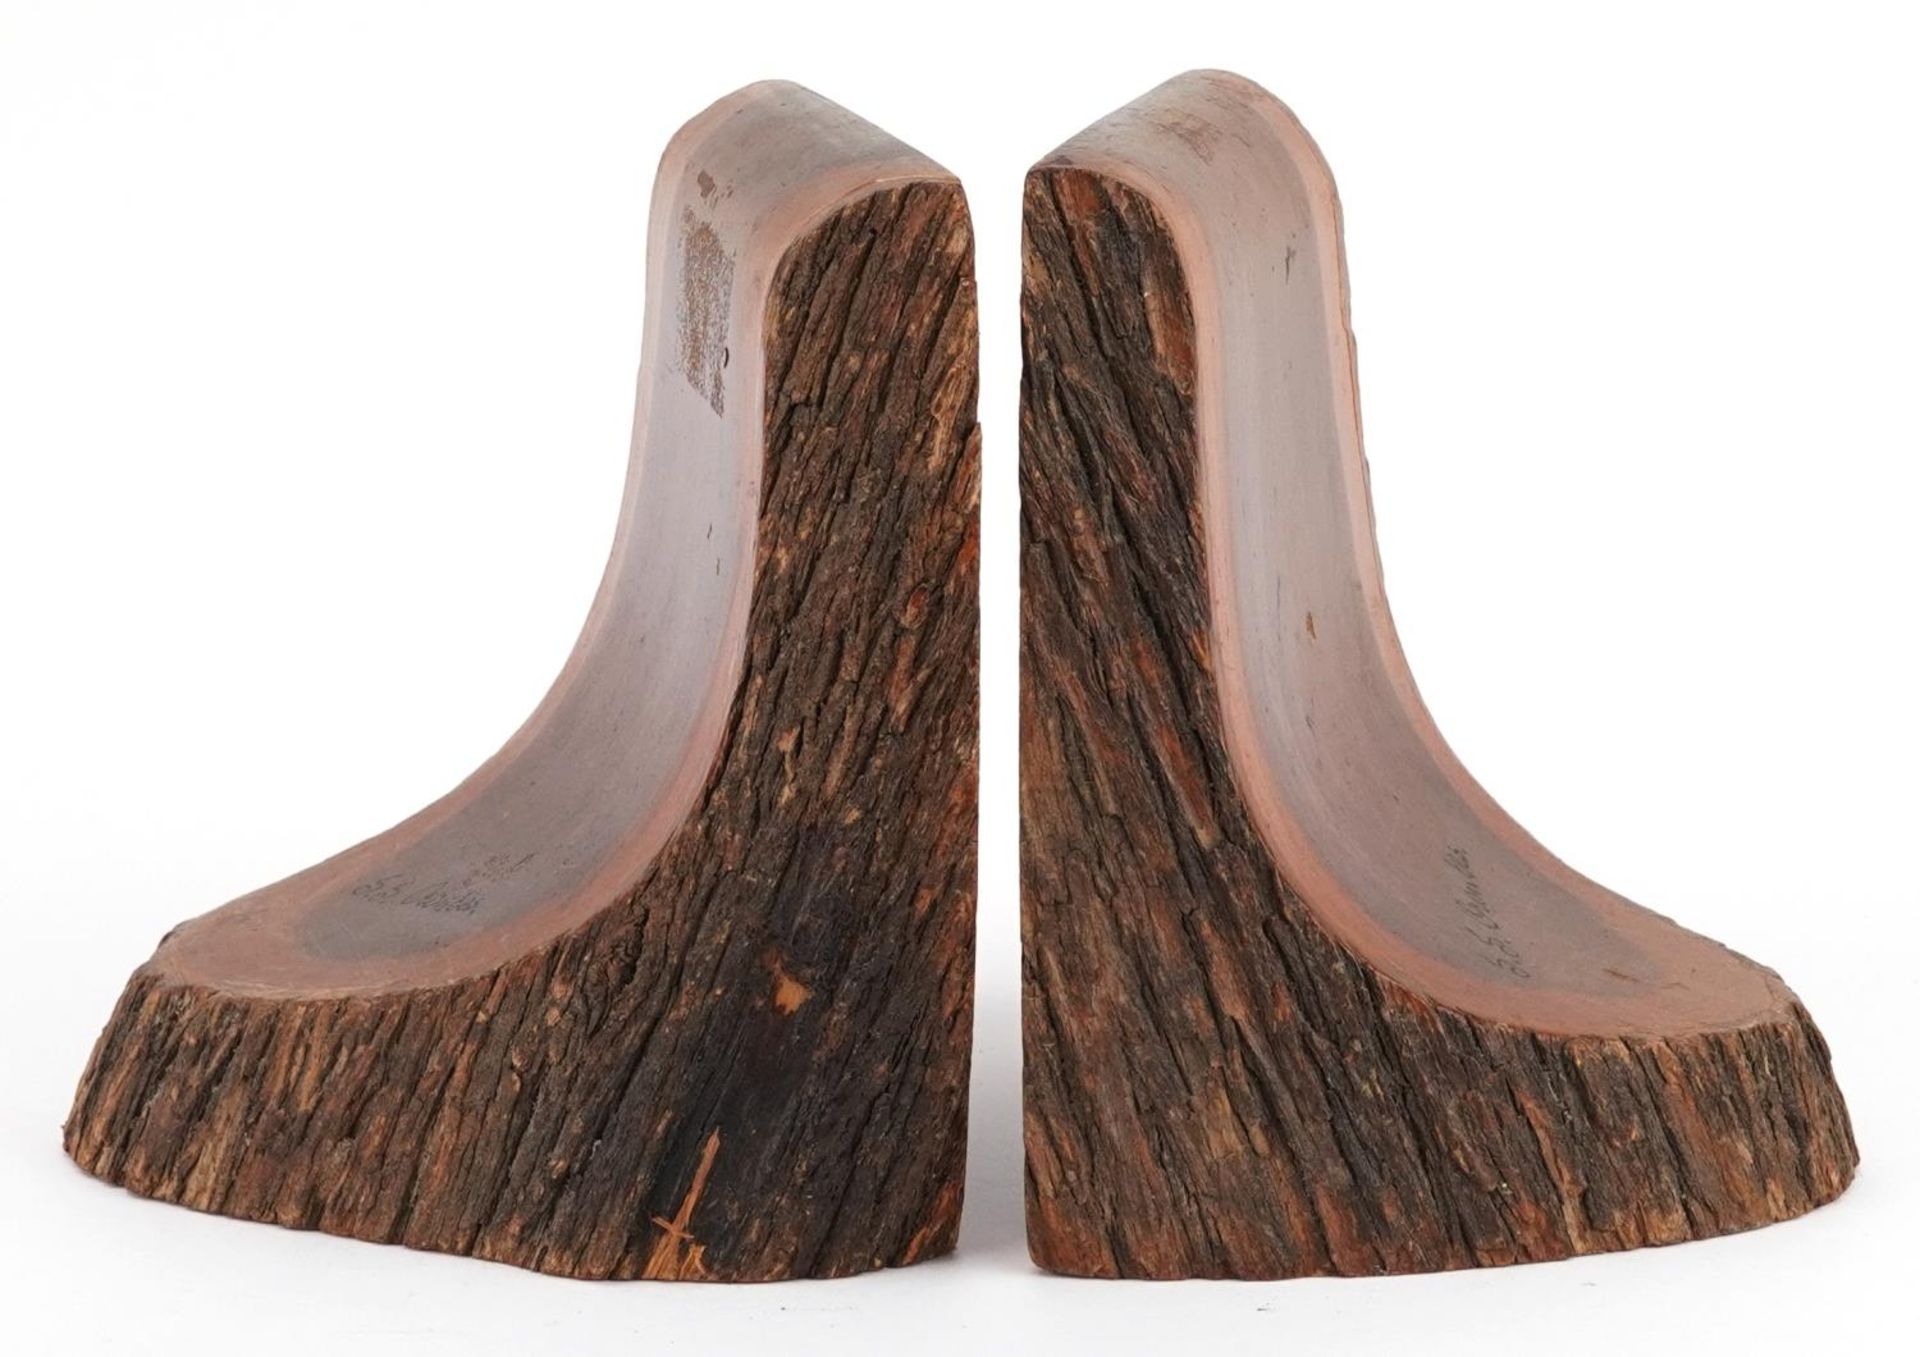 Pair of shipping interest naturalistic wooden bookends impressed S S Orontes, 14cm high : For